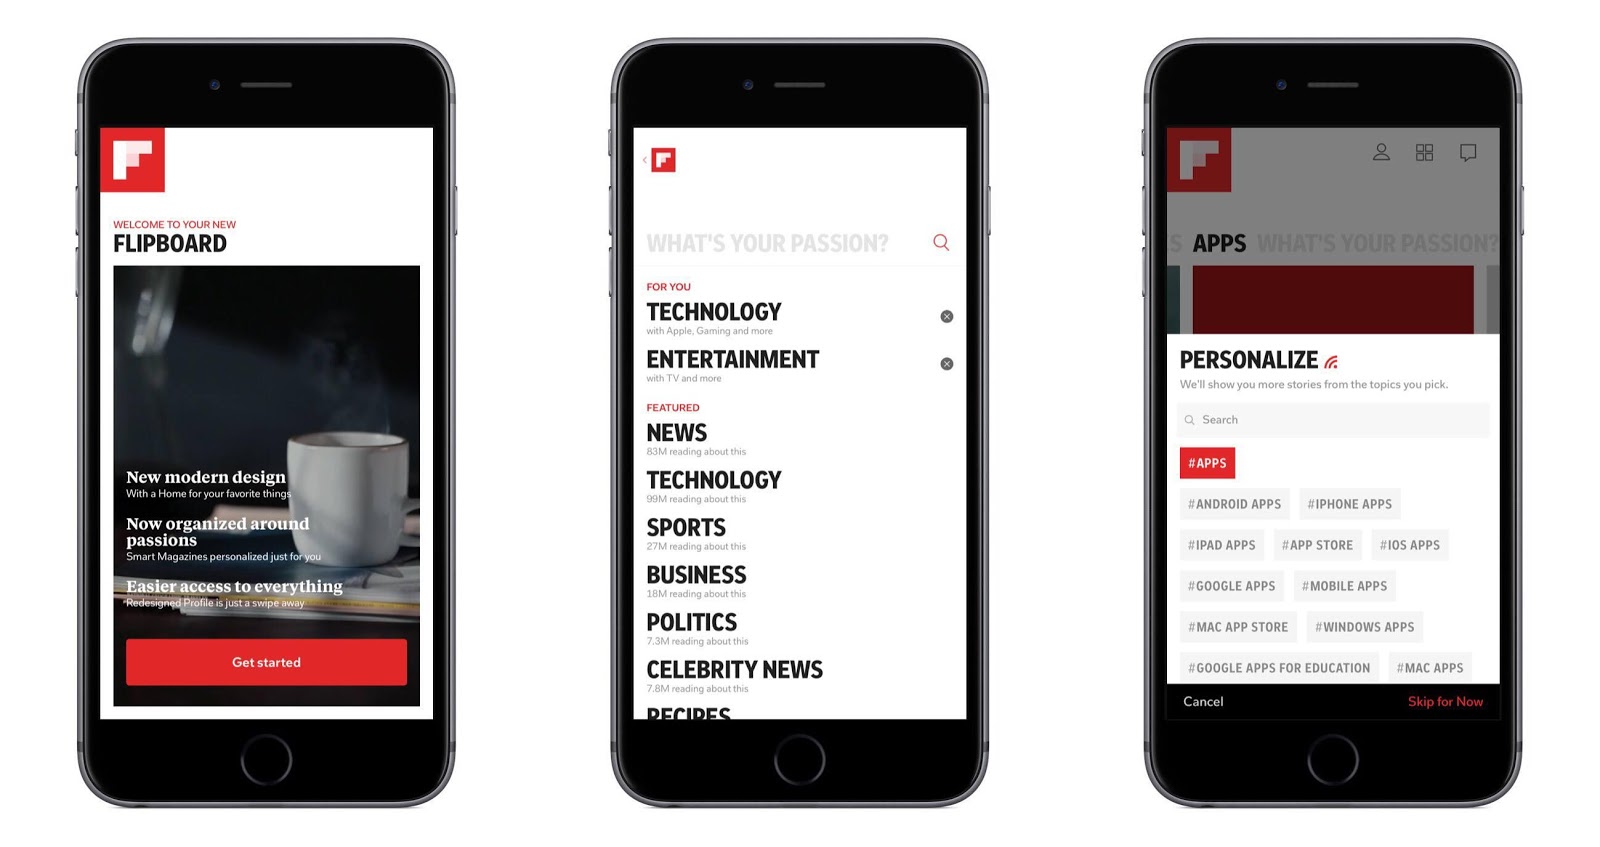 See 5 Apps that Provide Daily News and How to Download